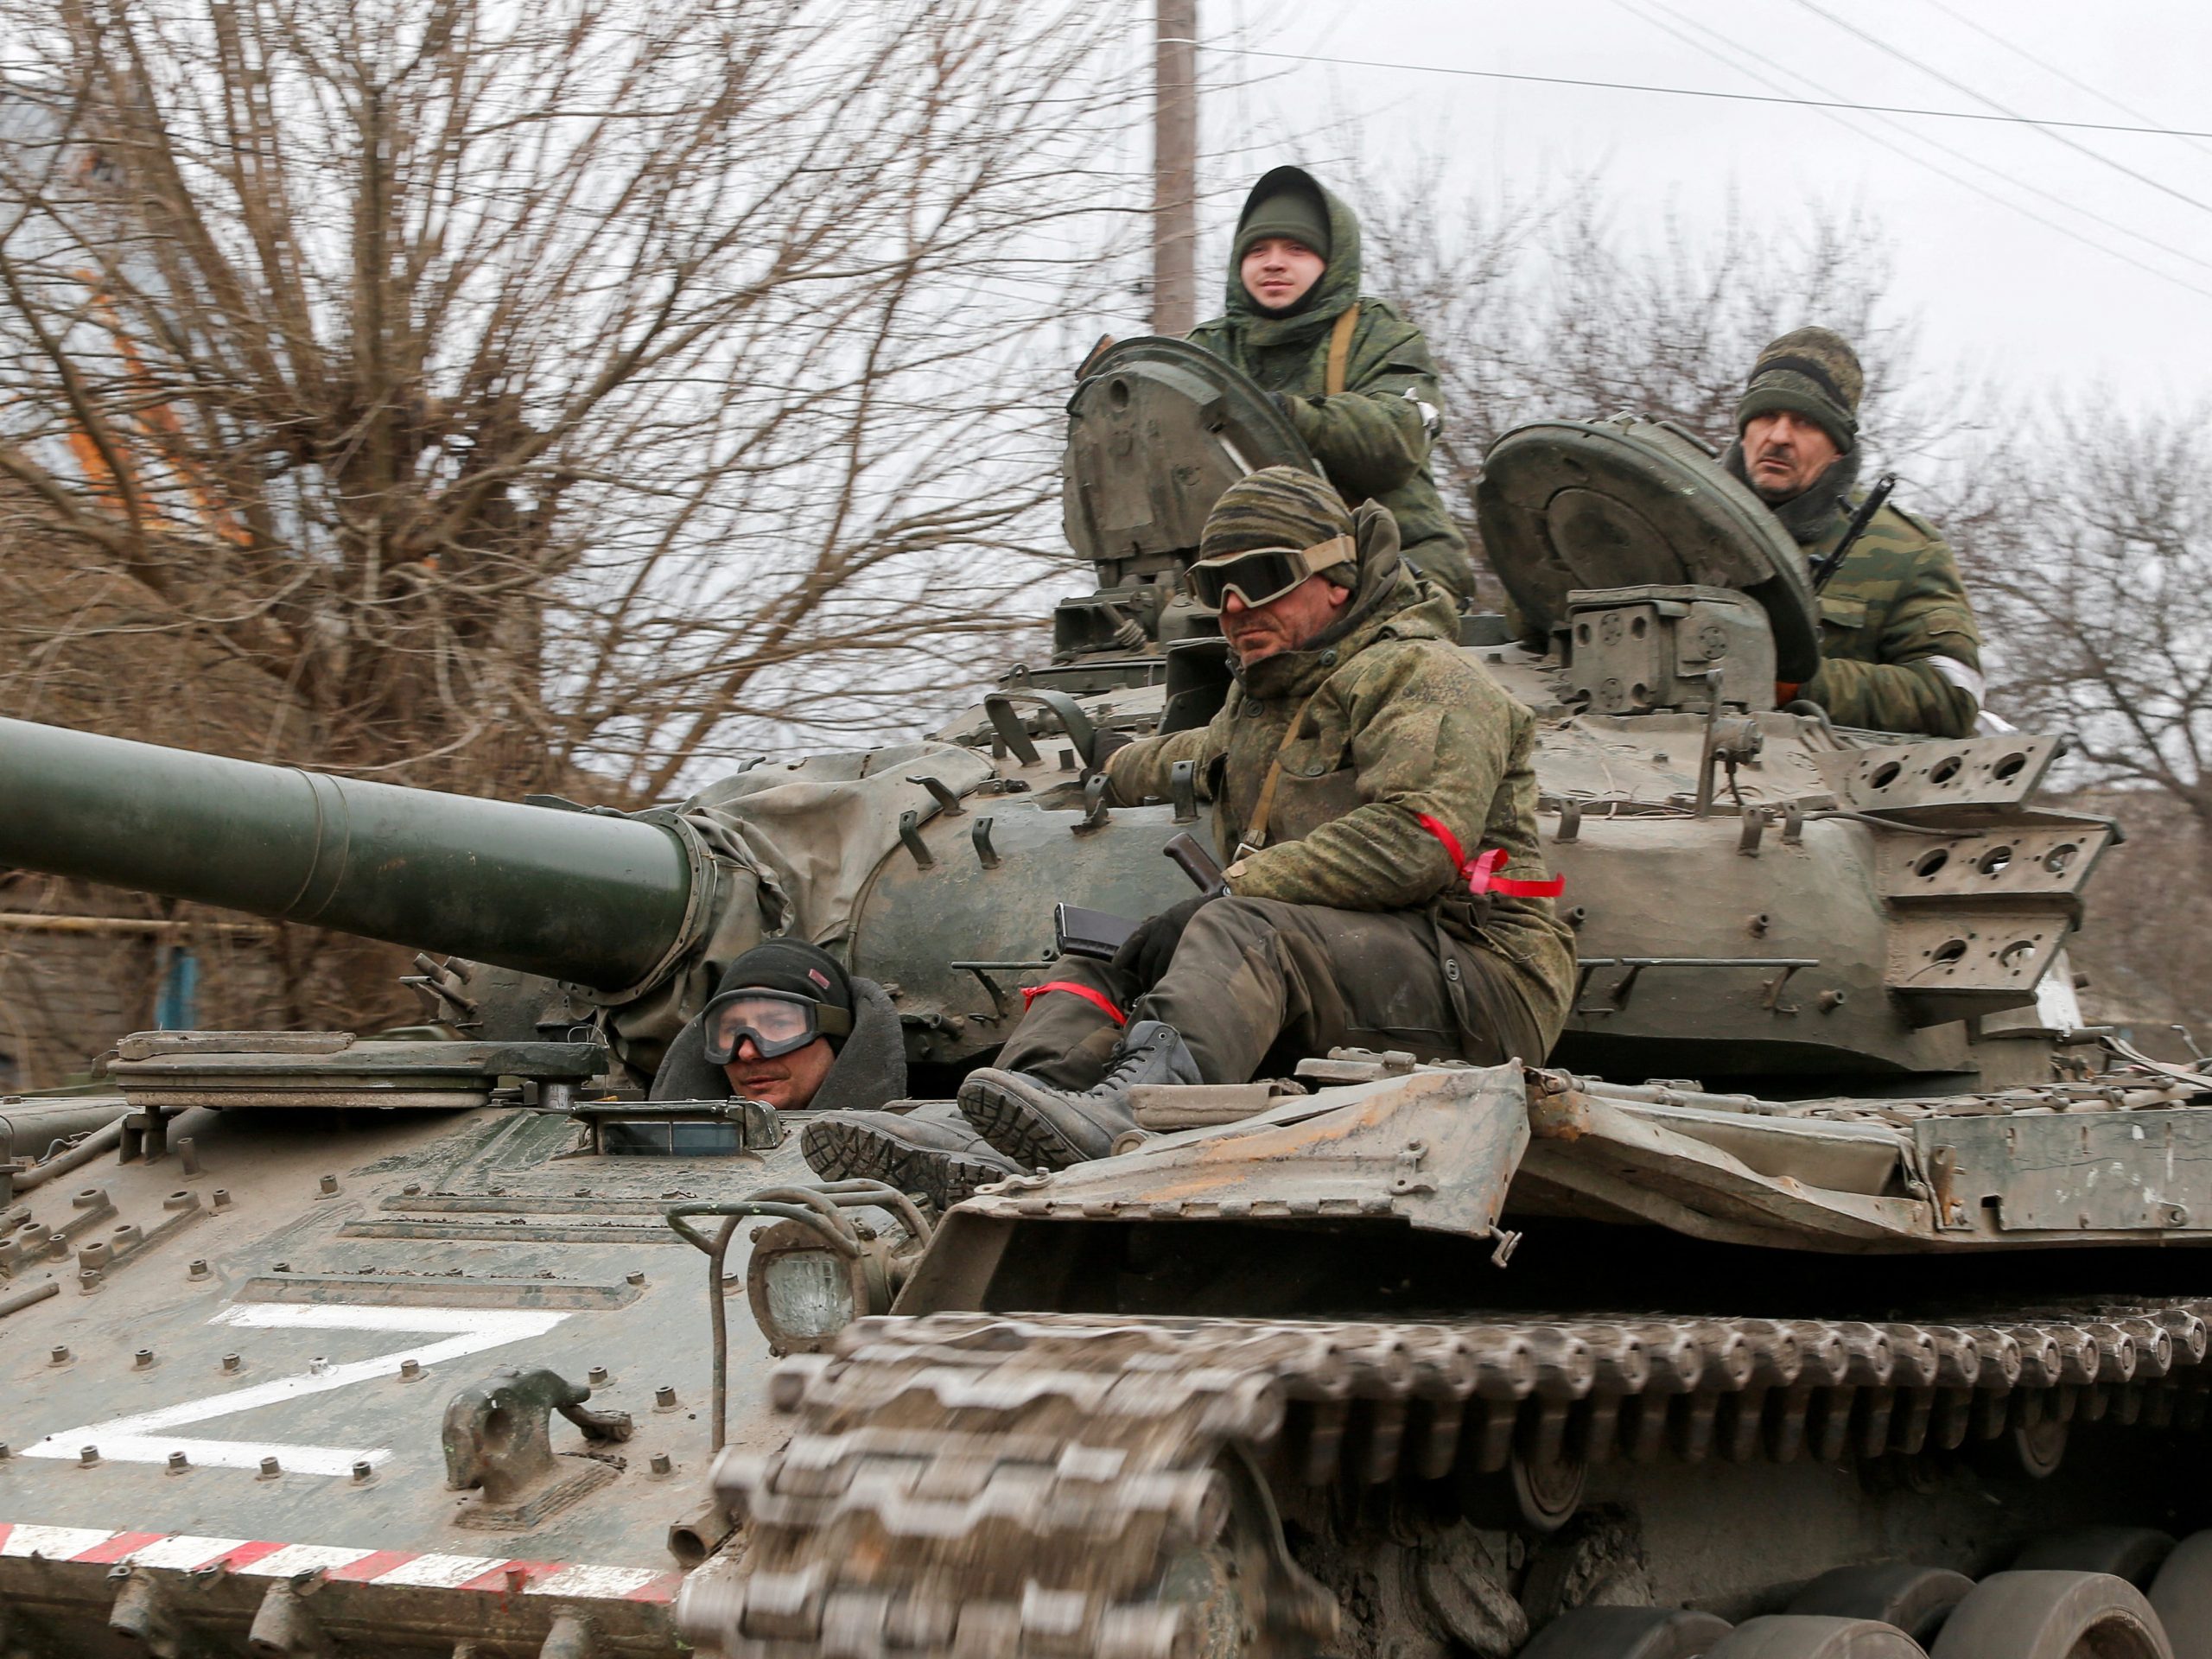 Service members of pro-Russian troops in uniforms without insignia are seen atop of a tank with the letter "Z" painted on its sides in the separatist-controlled settlement of Buhas (Bugas), as Russia's invasion of Ukraine continues, in the Donetsk region, Ukraine March 1, 2022.